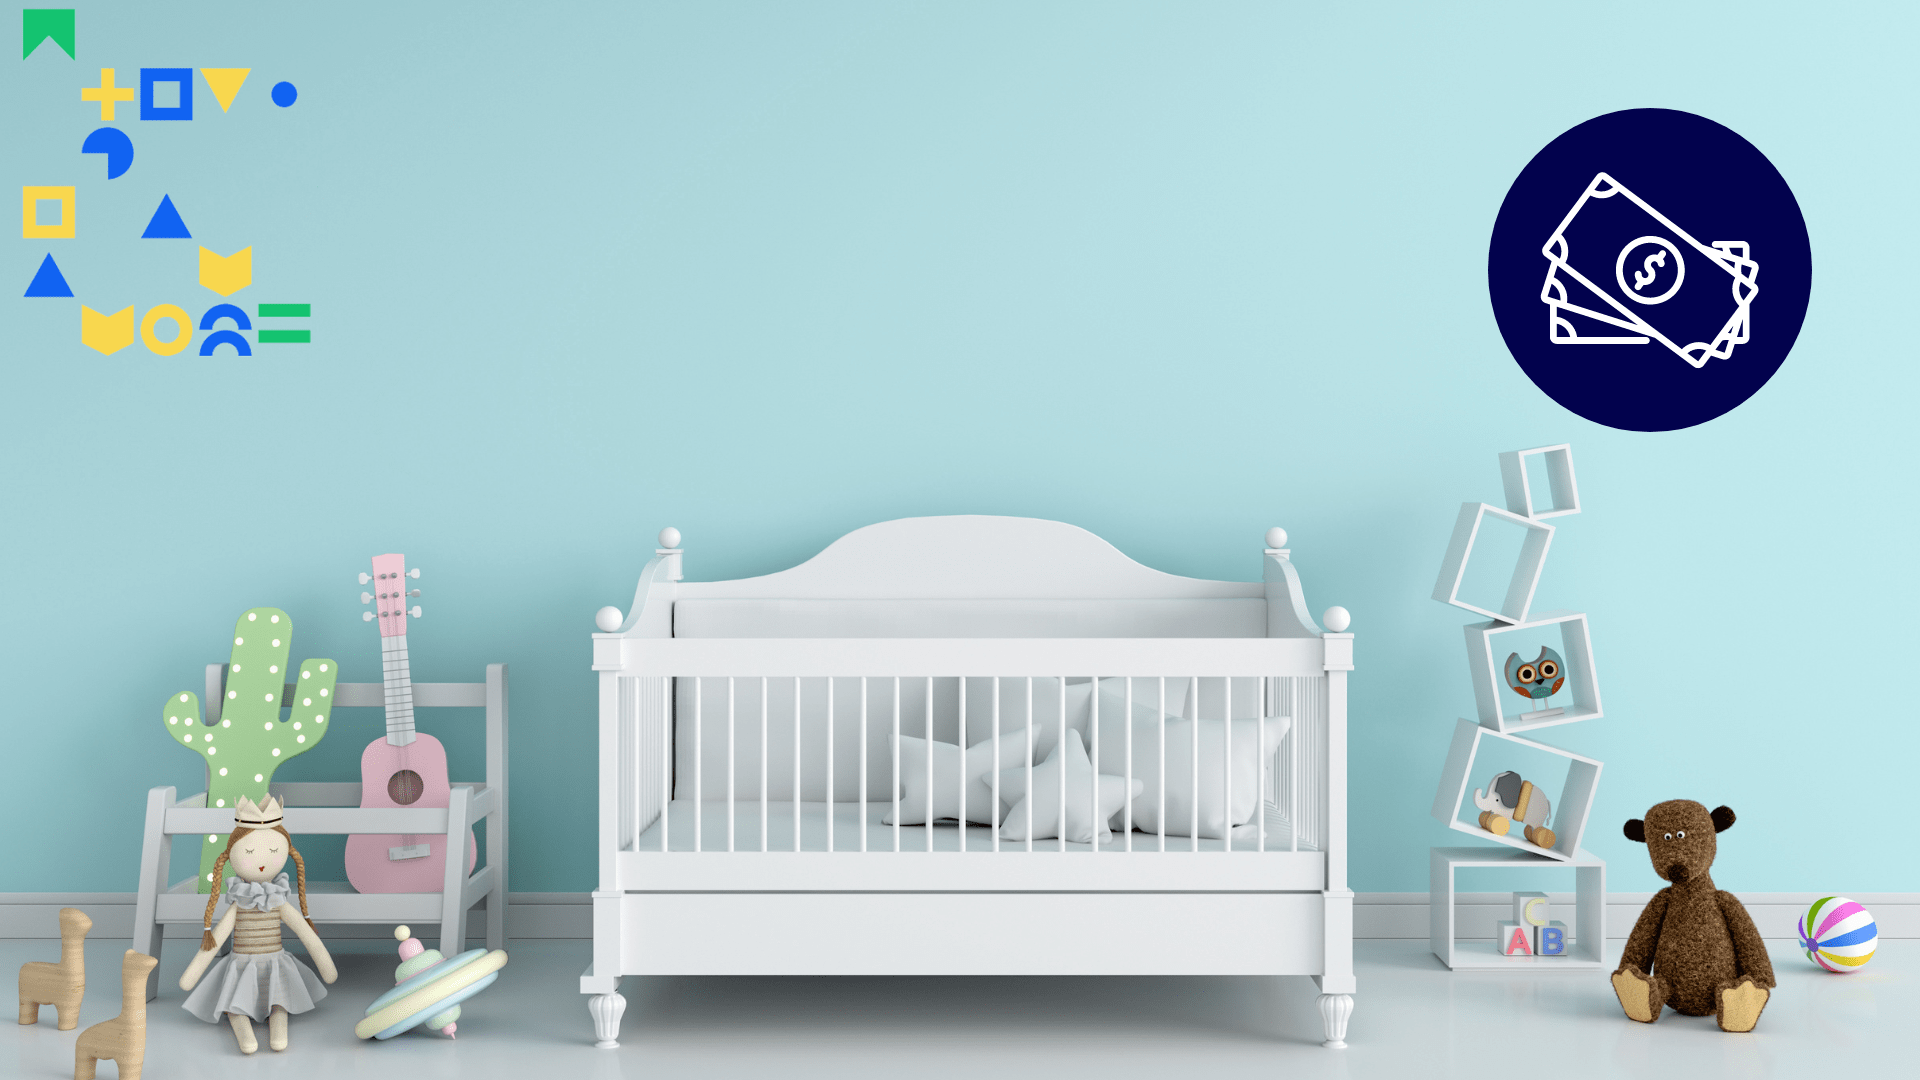 Image of a nursery with a white crib, baby toys and stuffed animals, and blue wall paint, to illustrate the concept of budgeting for parenthood.